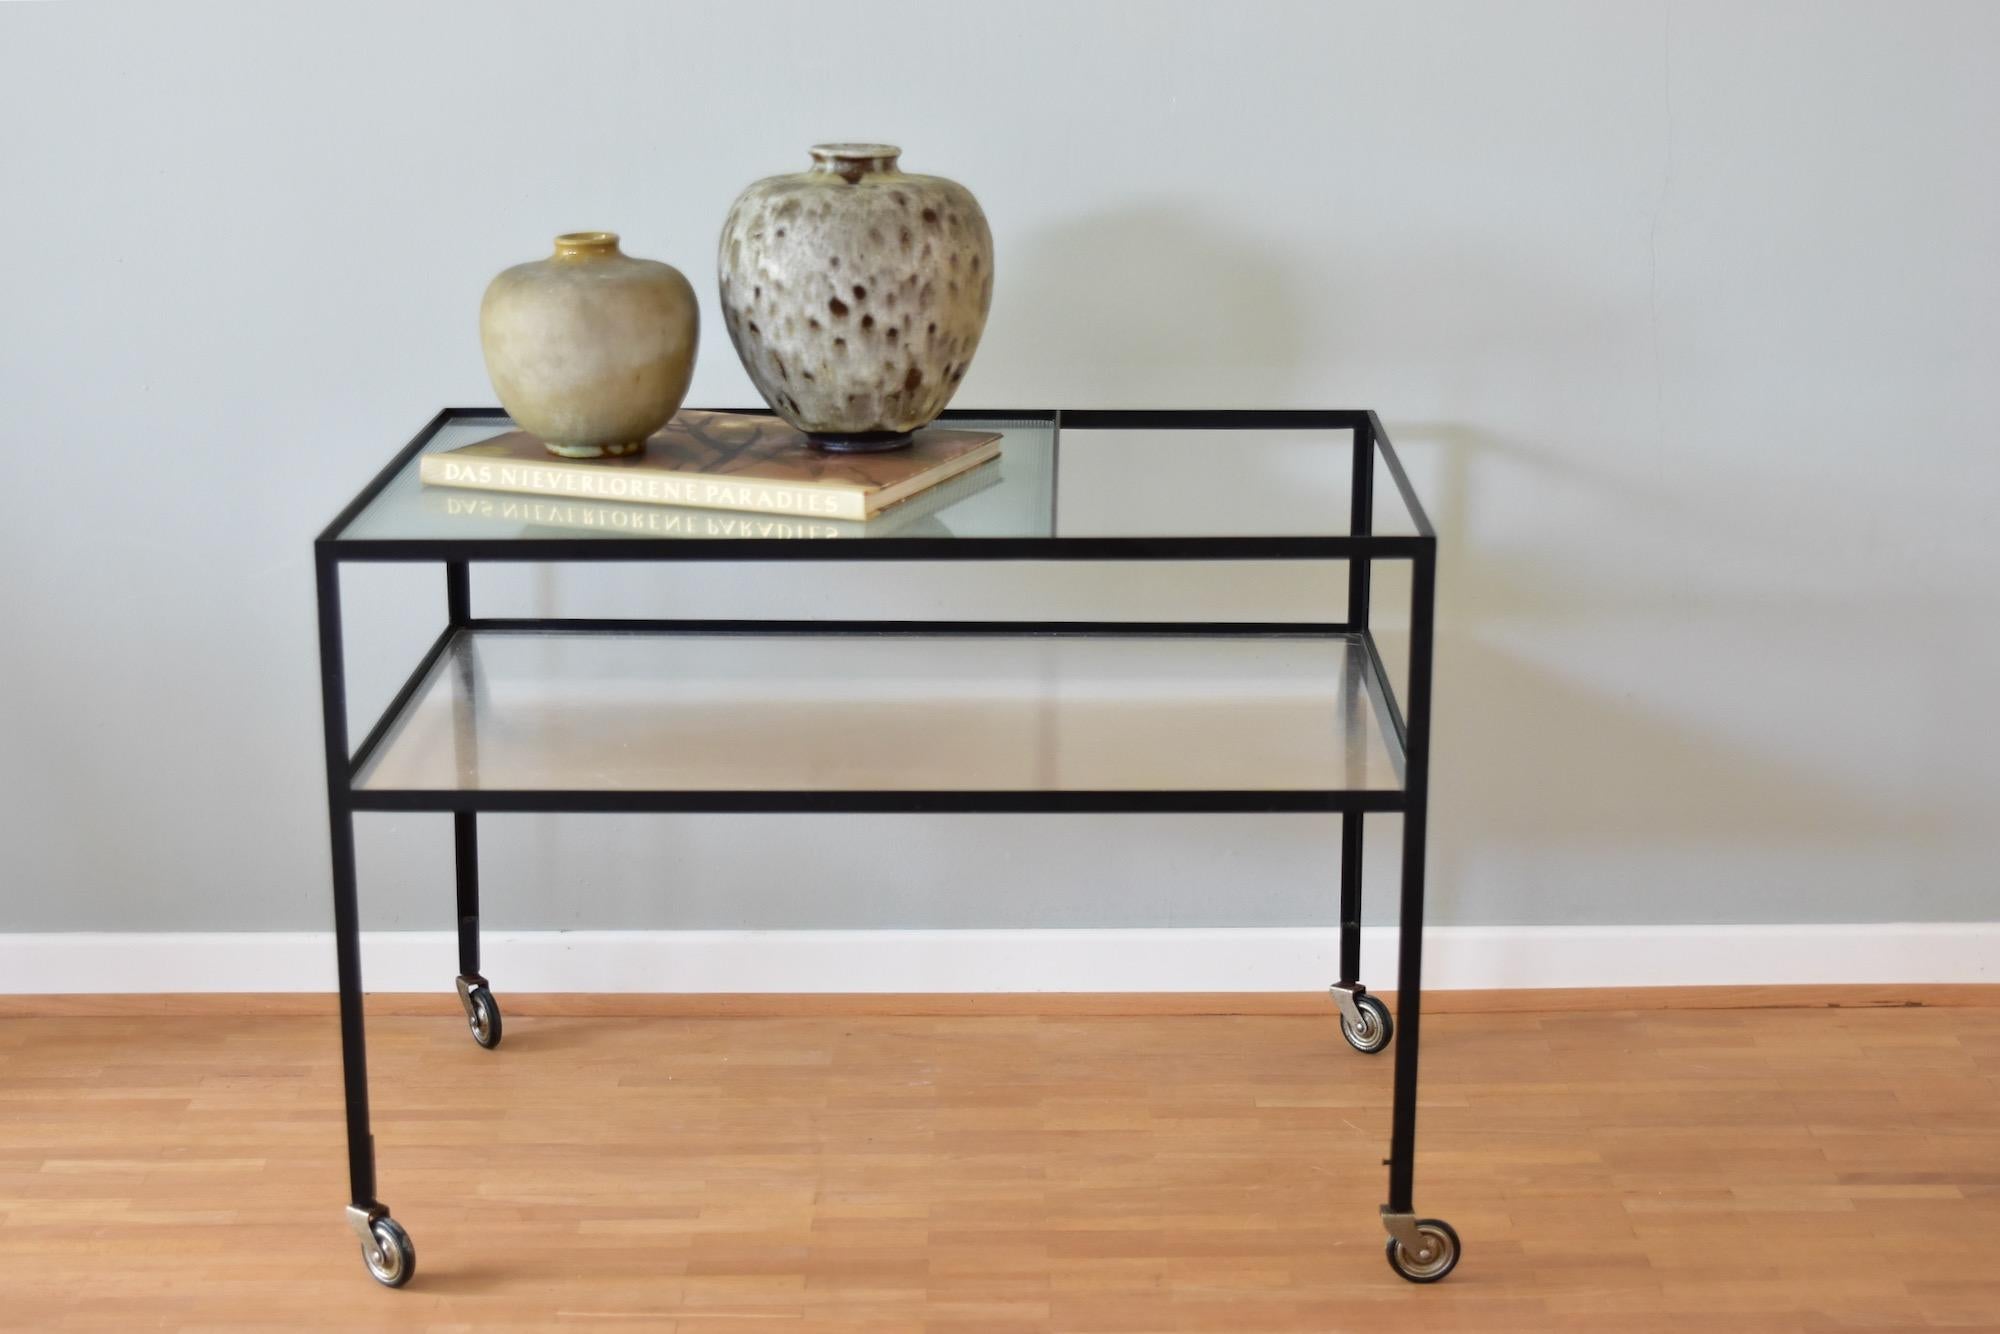 Vintage Herbert Hirche 1960's black colored metal and original corrugated glass serving cart. Produced by Christian Holzäpfel KG Germany. 
Nice vintage condition.